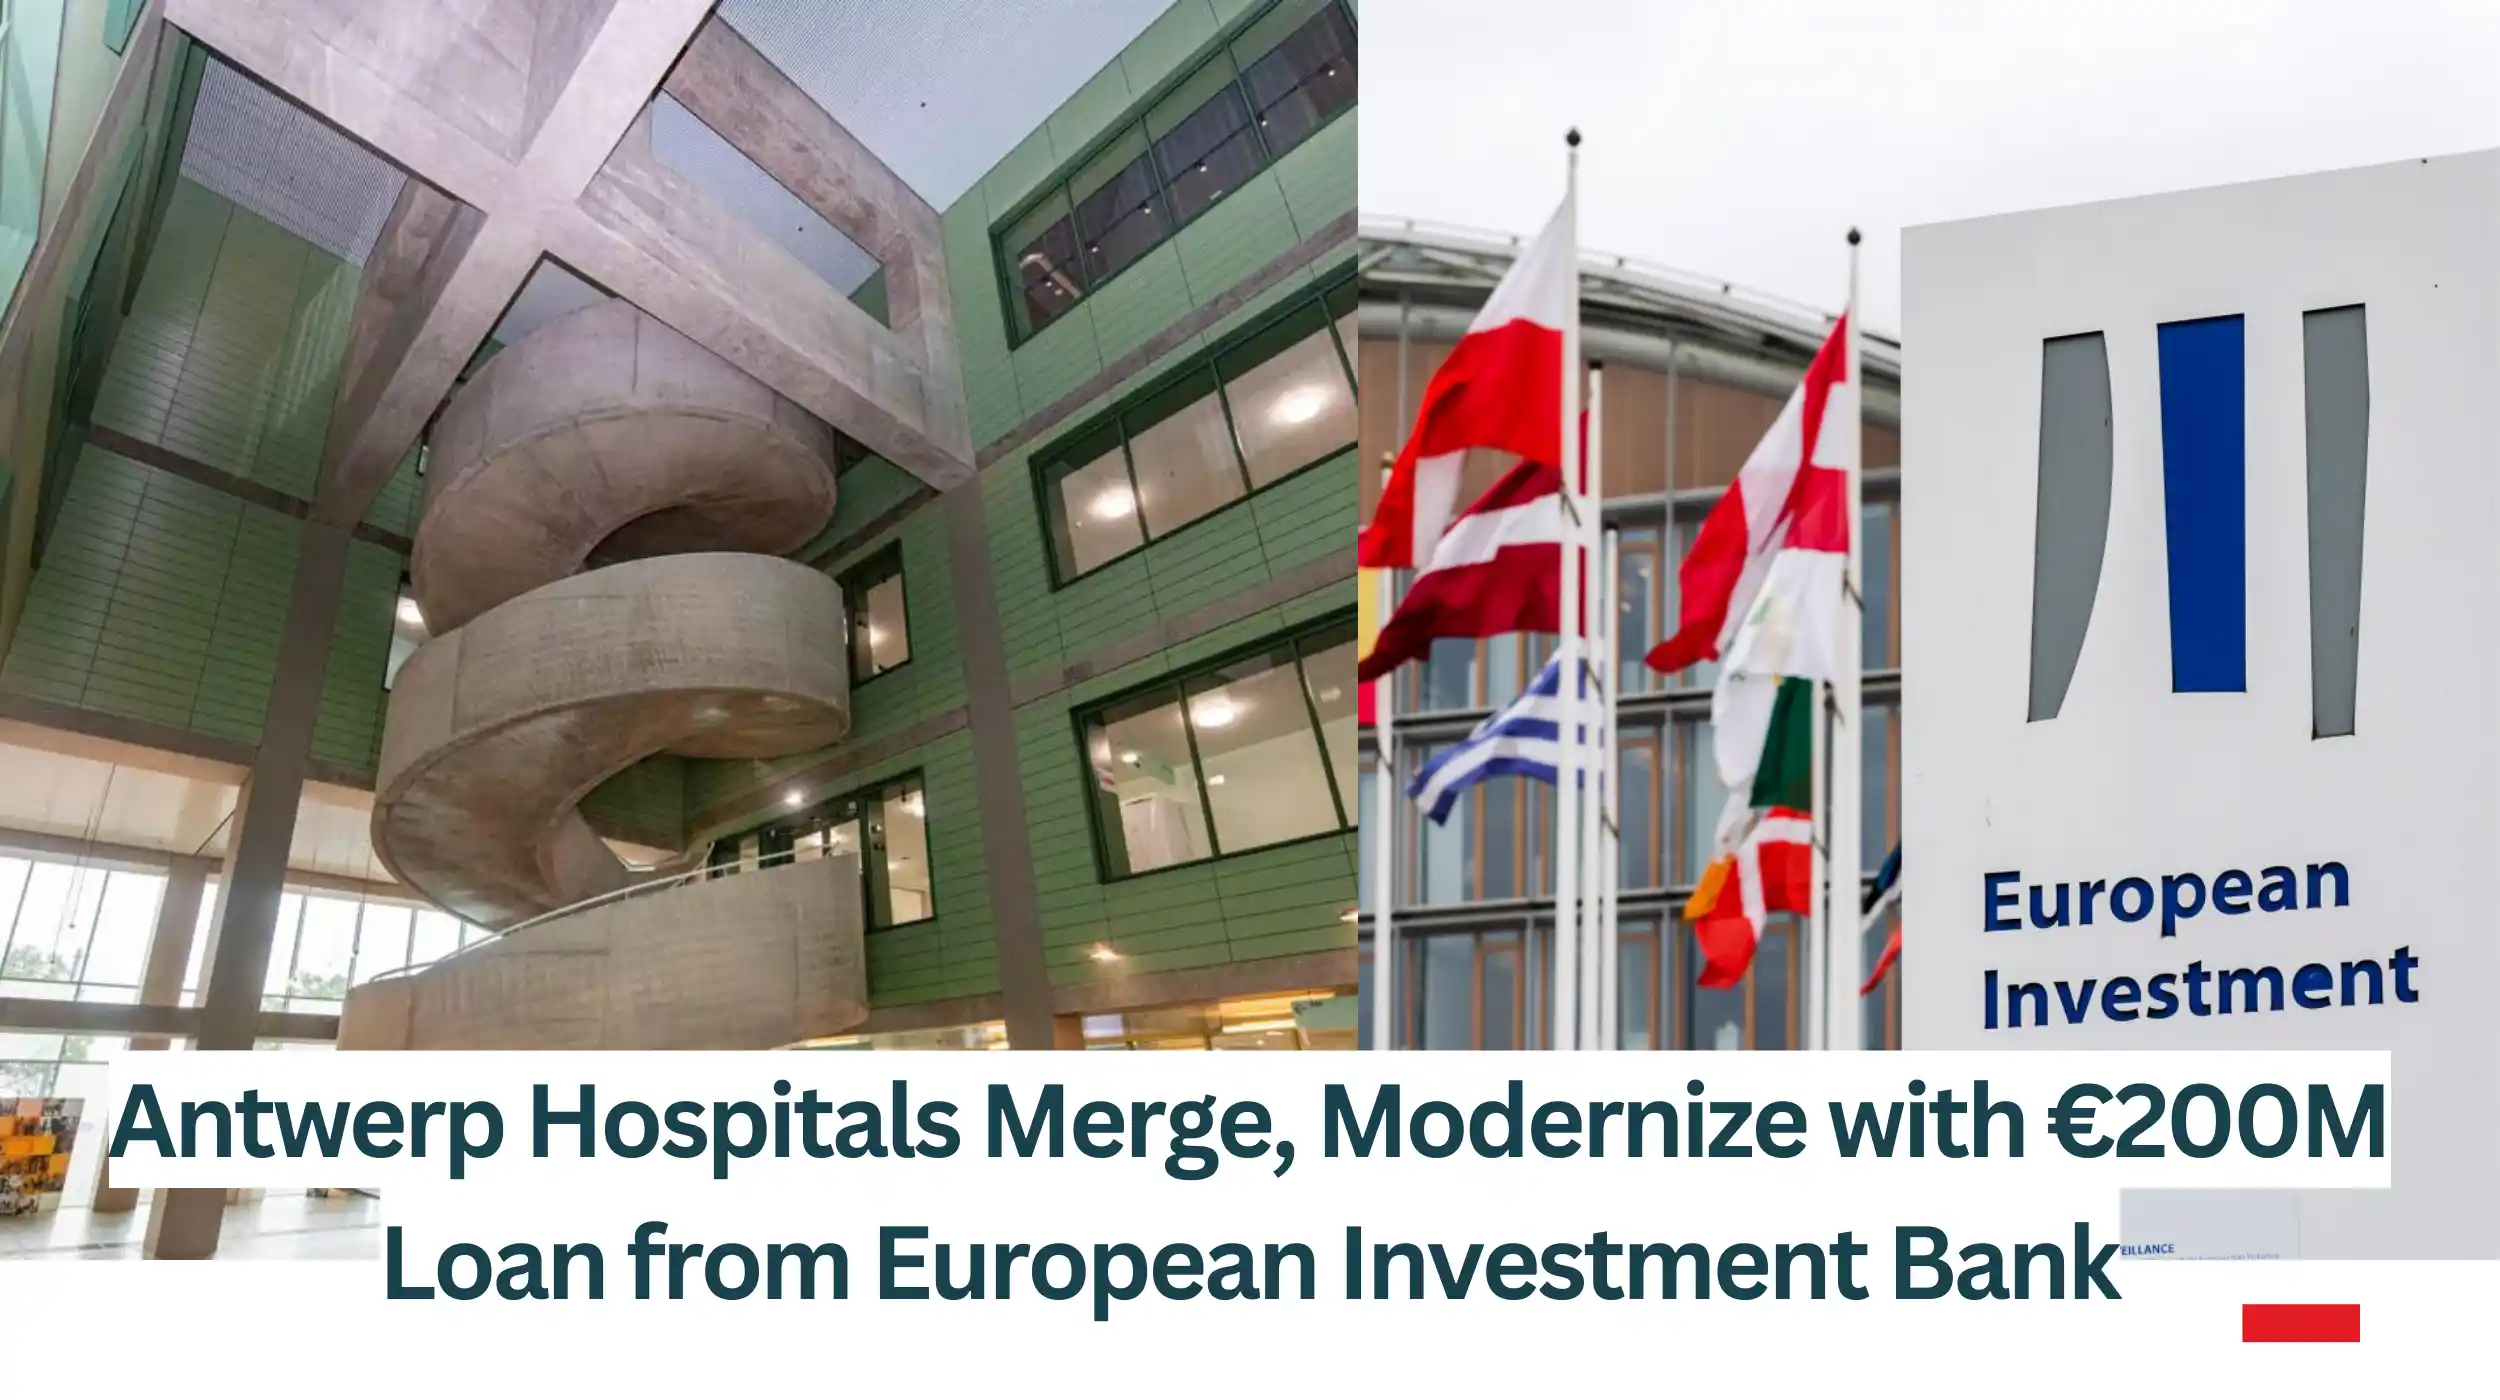 Antwerp-Hospitals-Merge-Modernize-with-E200M-Loan-from-European-Investment-Bank